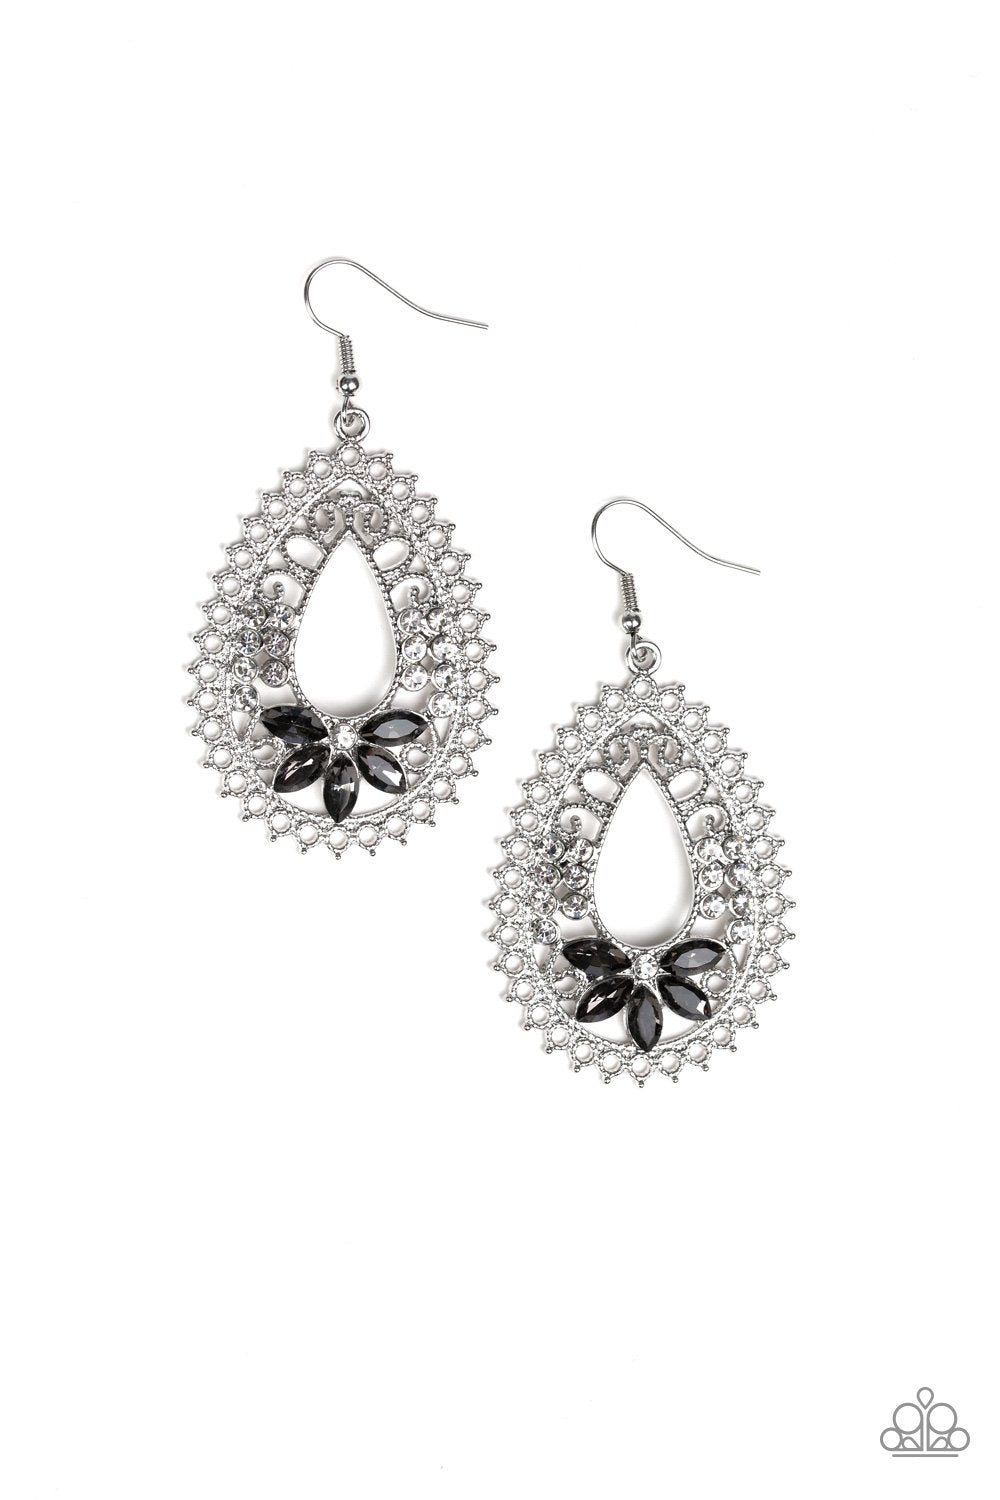 Instant REFLECT Silver Rhinestone Earrings - Paparazzi Accessories-CarasShop.com - $5 Jewelry by Cara Jewels